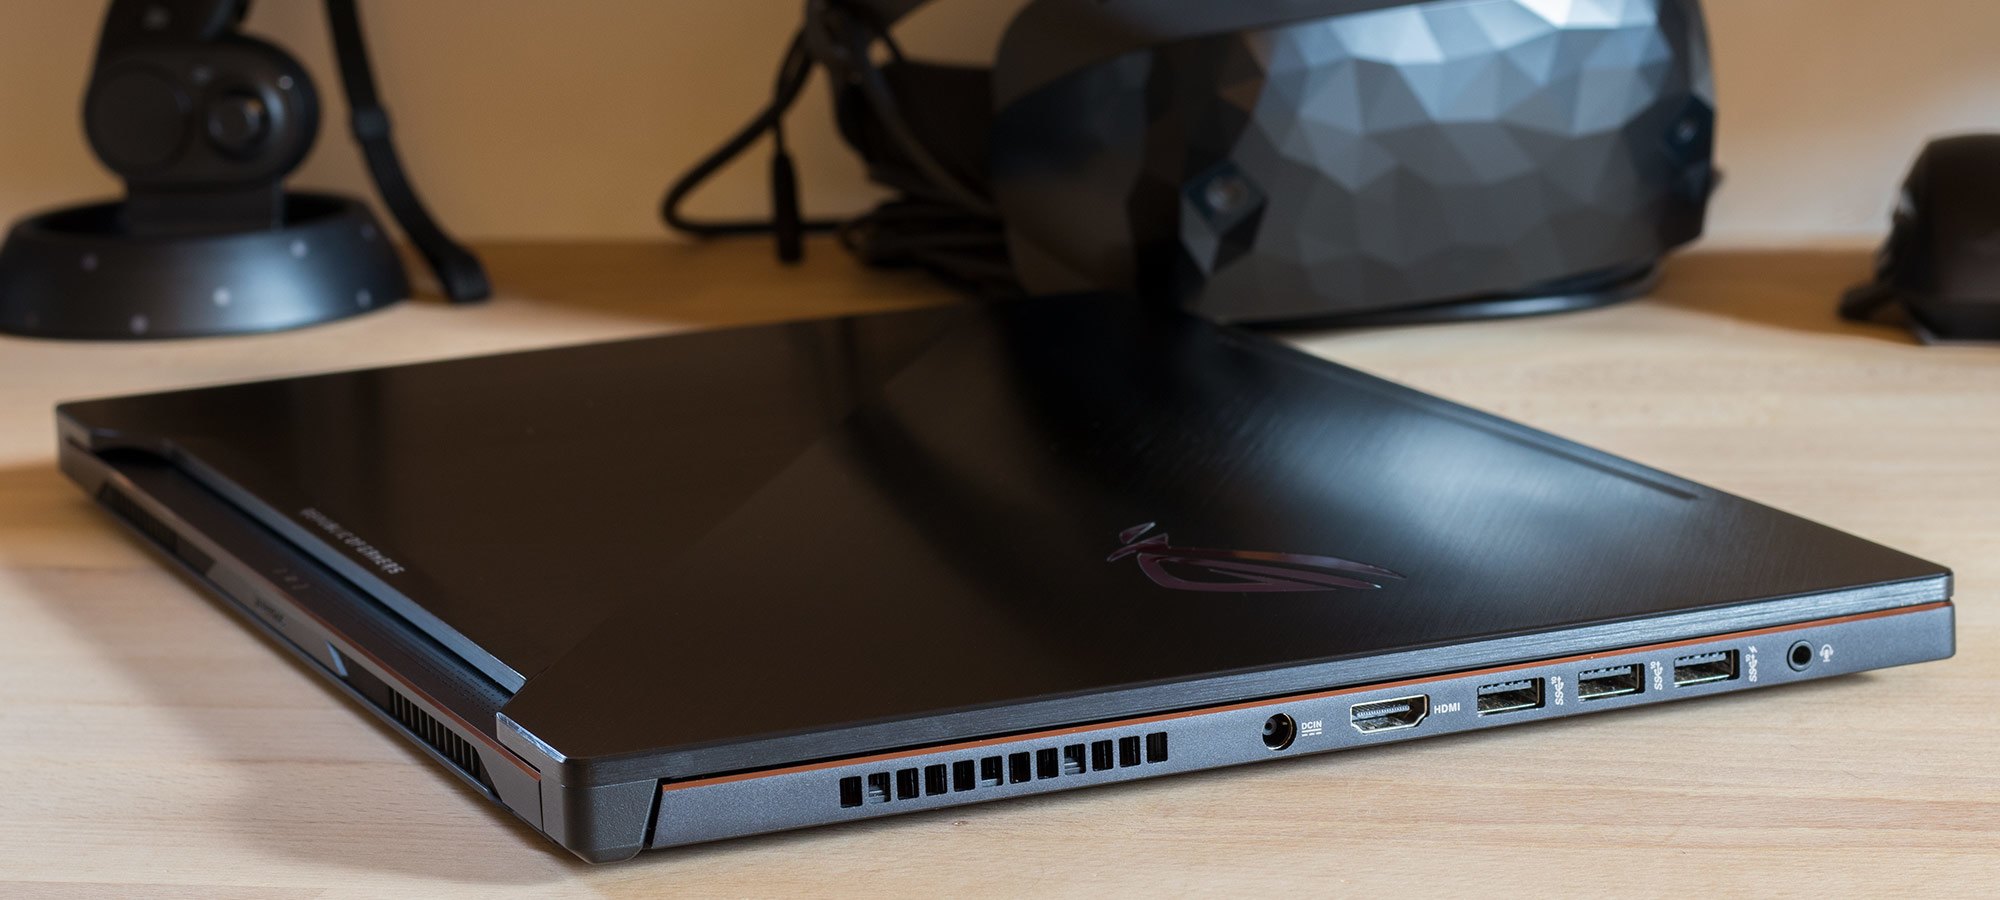 ASUS Launches ROG Zephyrus M (GM501): A More Traditional Flagship